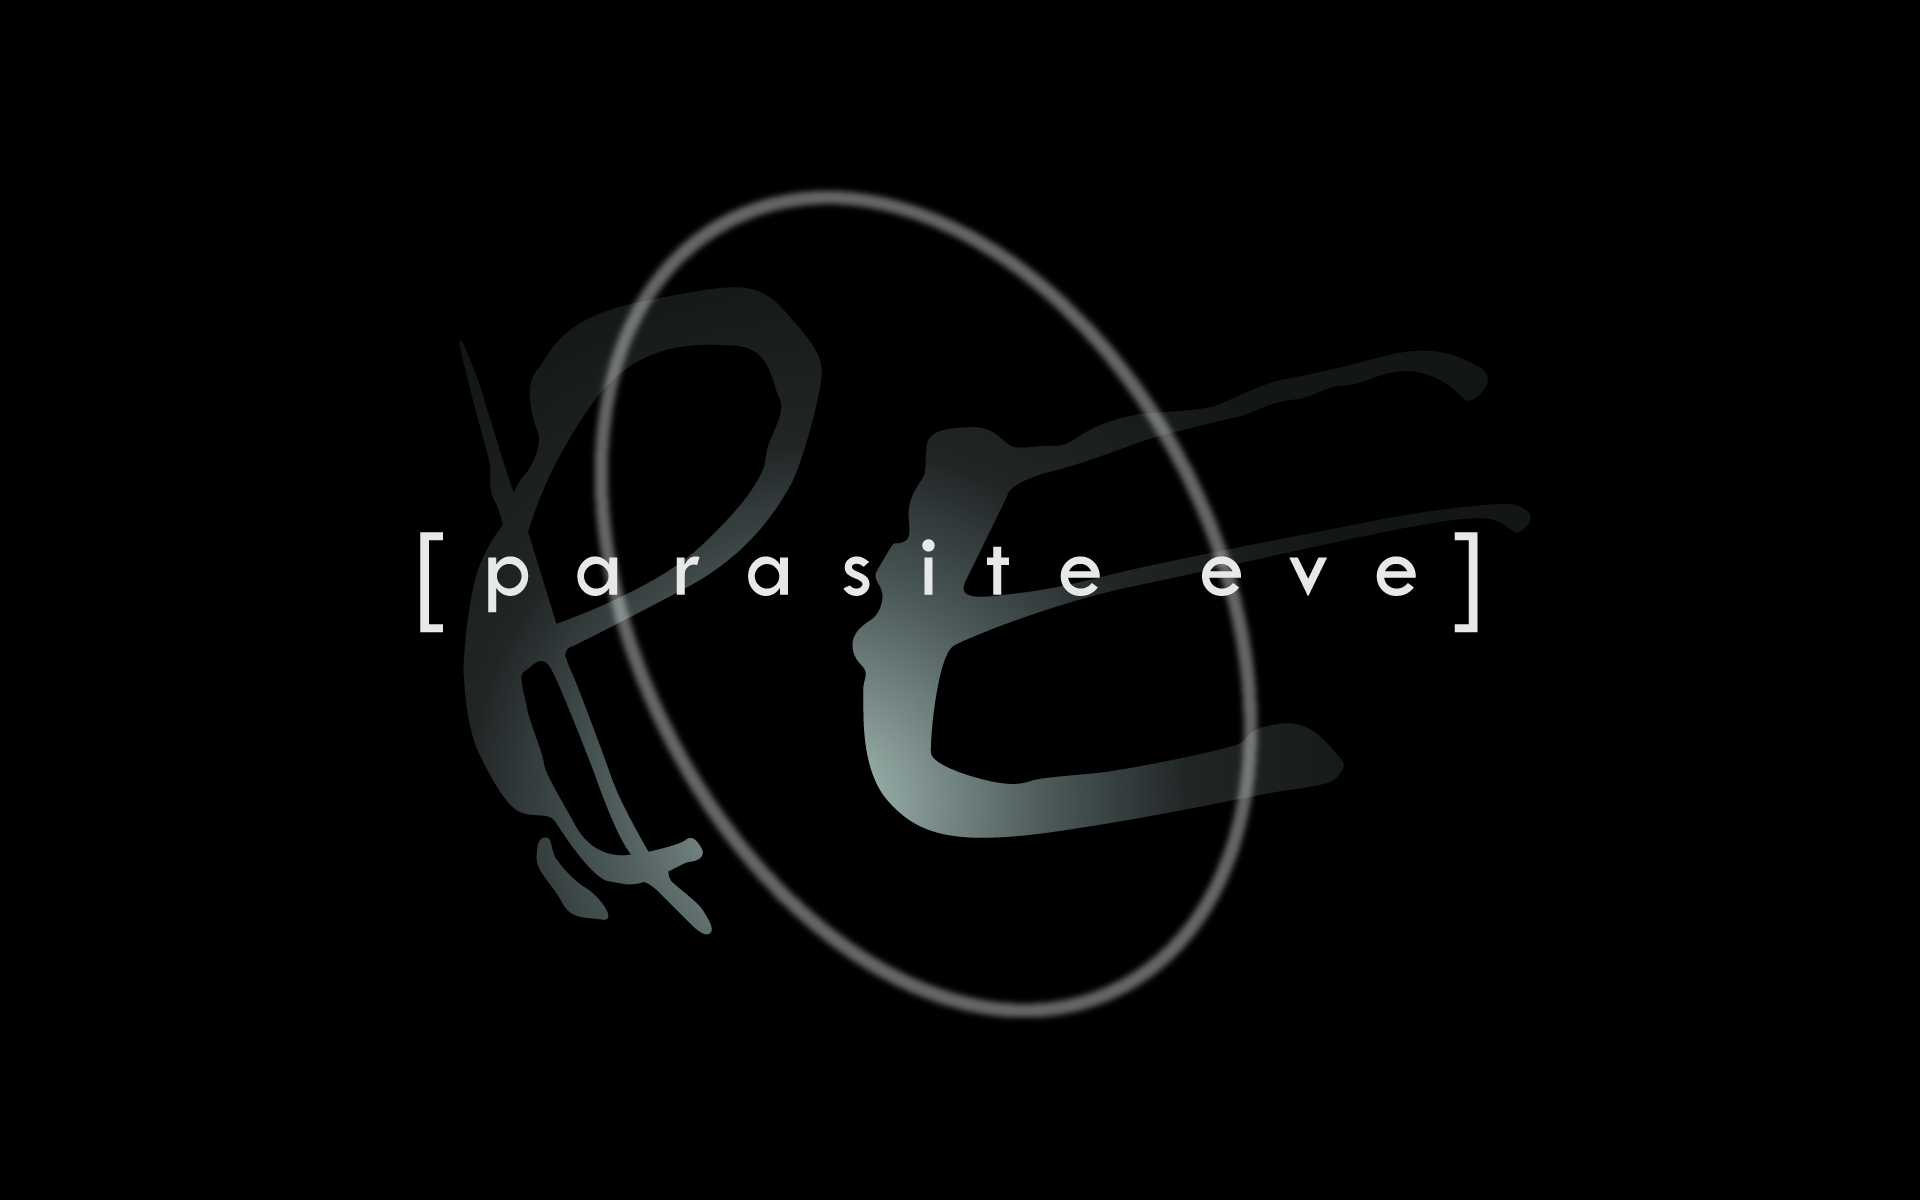 Parasite Eve 2 Wallpapers - Wallpaper Cave